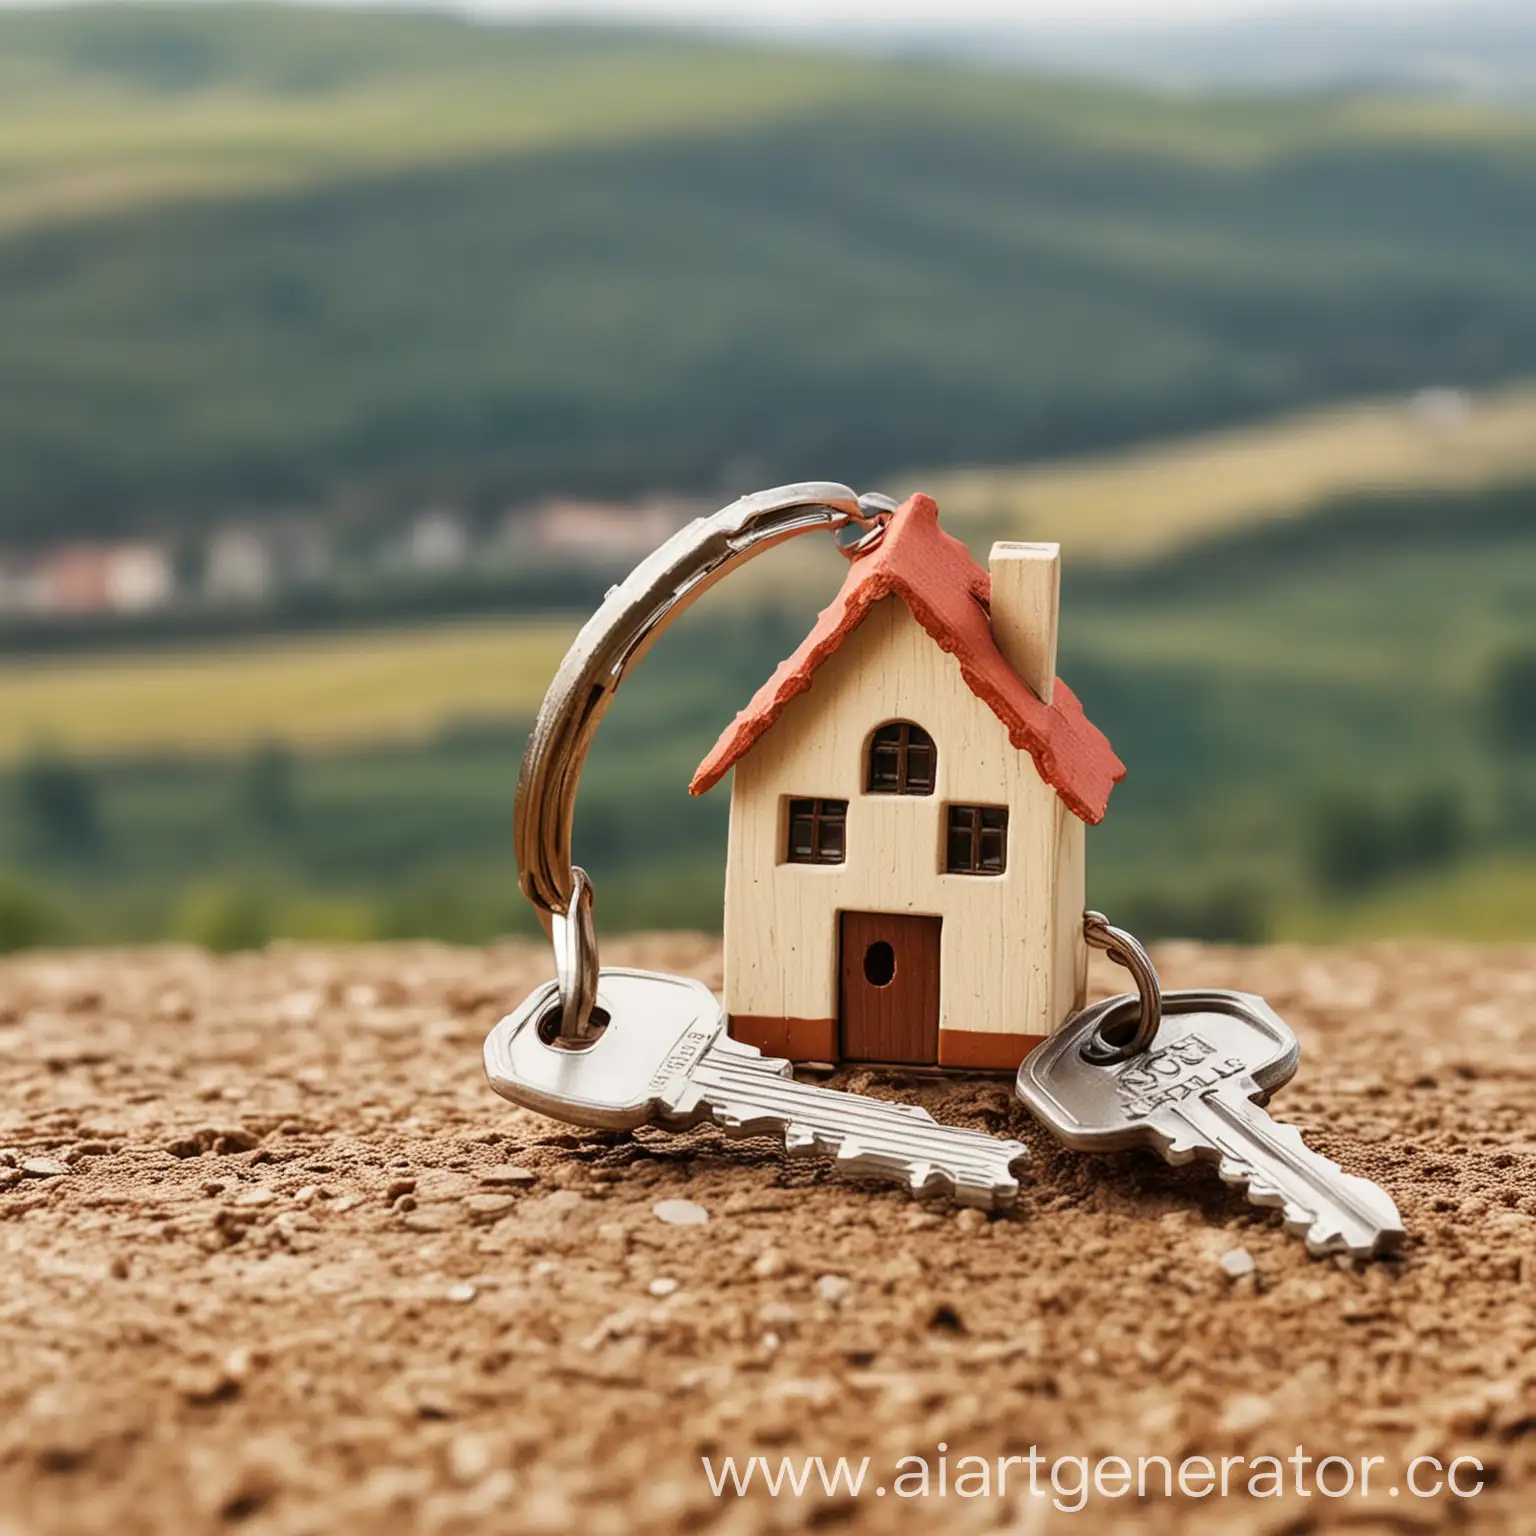 HouseShaped-Keychain-in-Countryside-Background